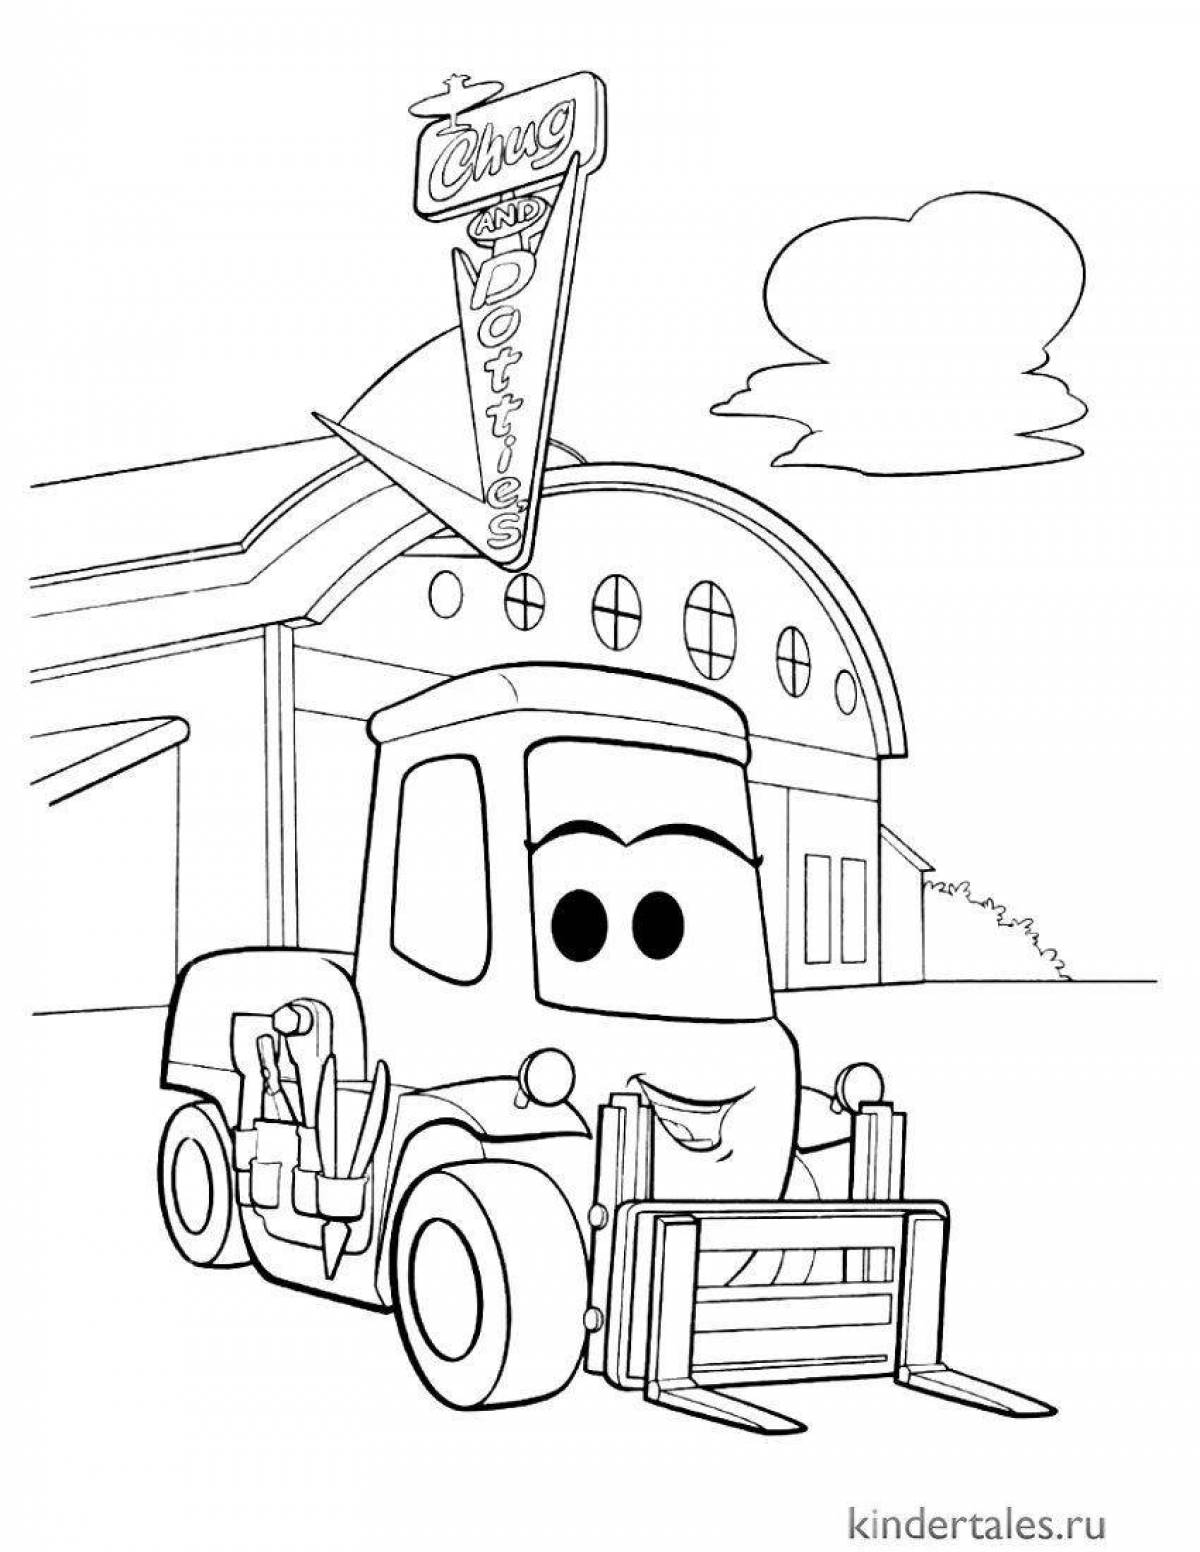 Cute left truck coloring pages for kids